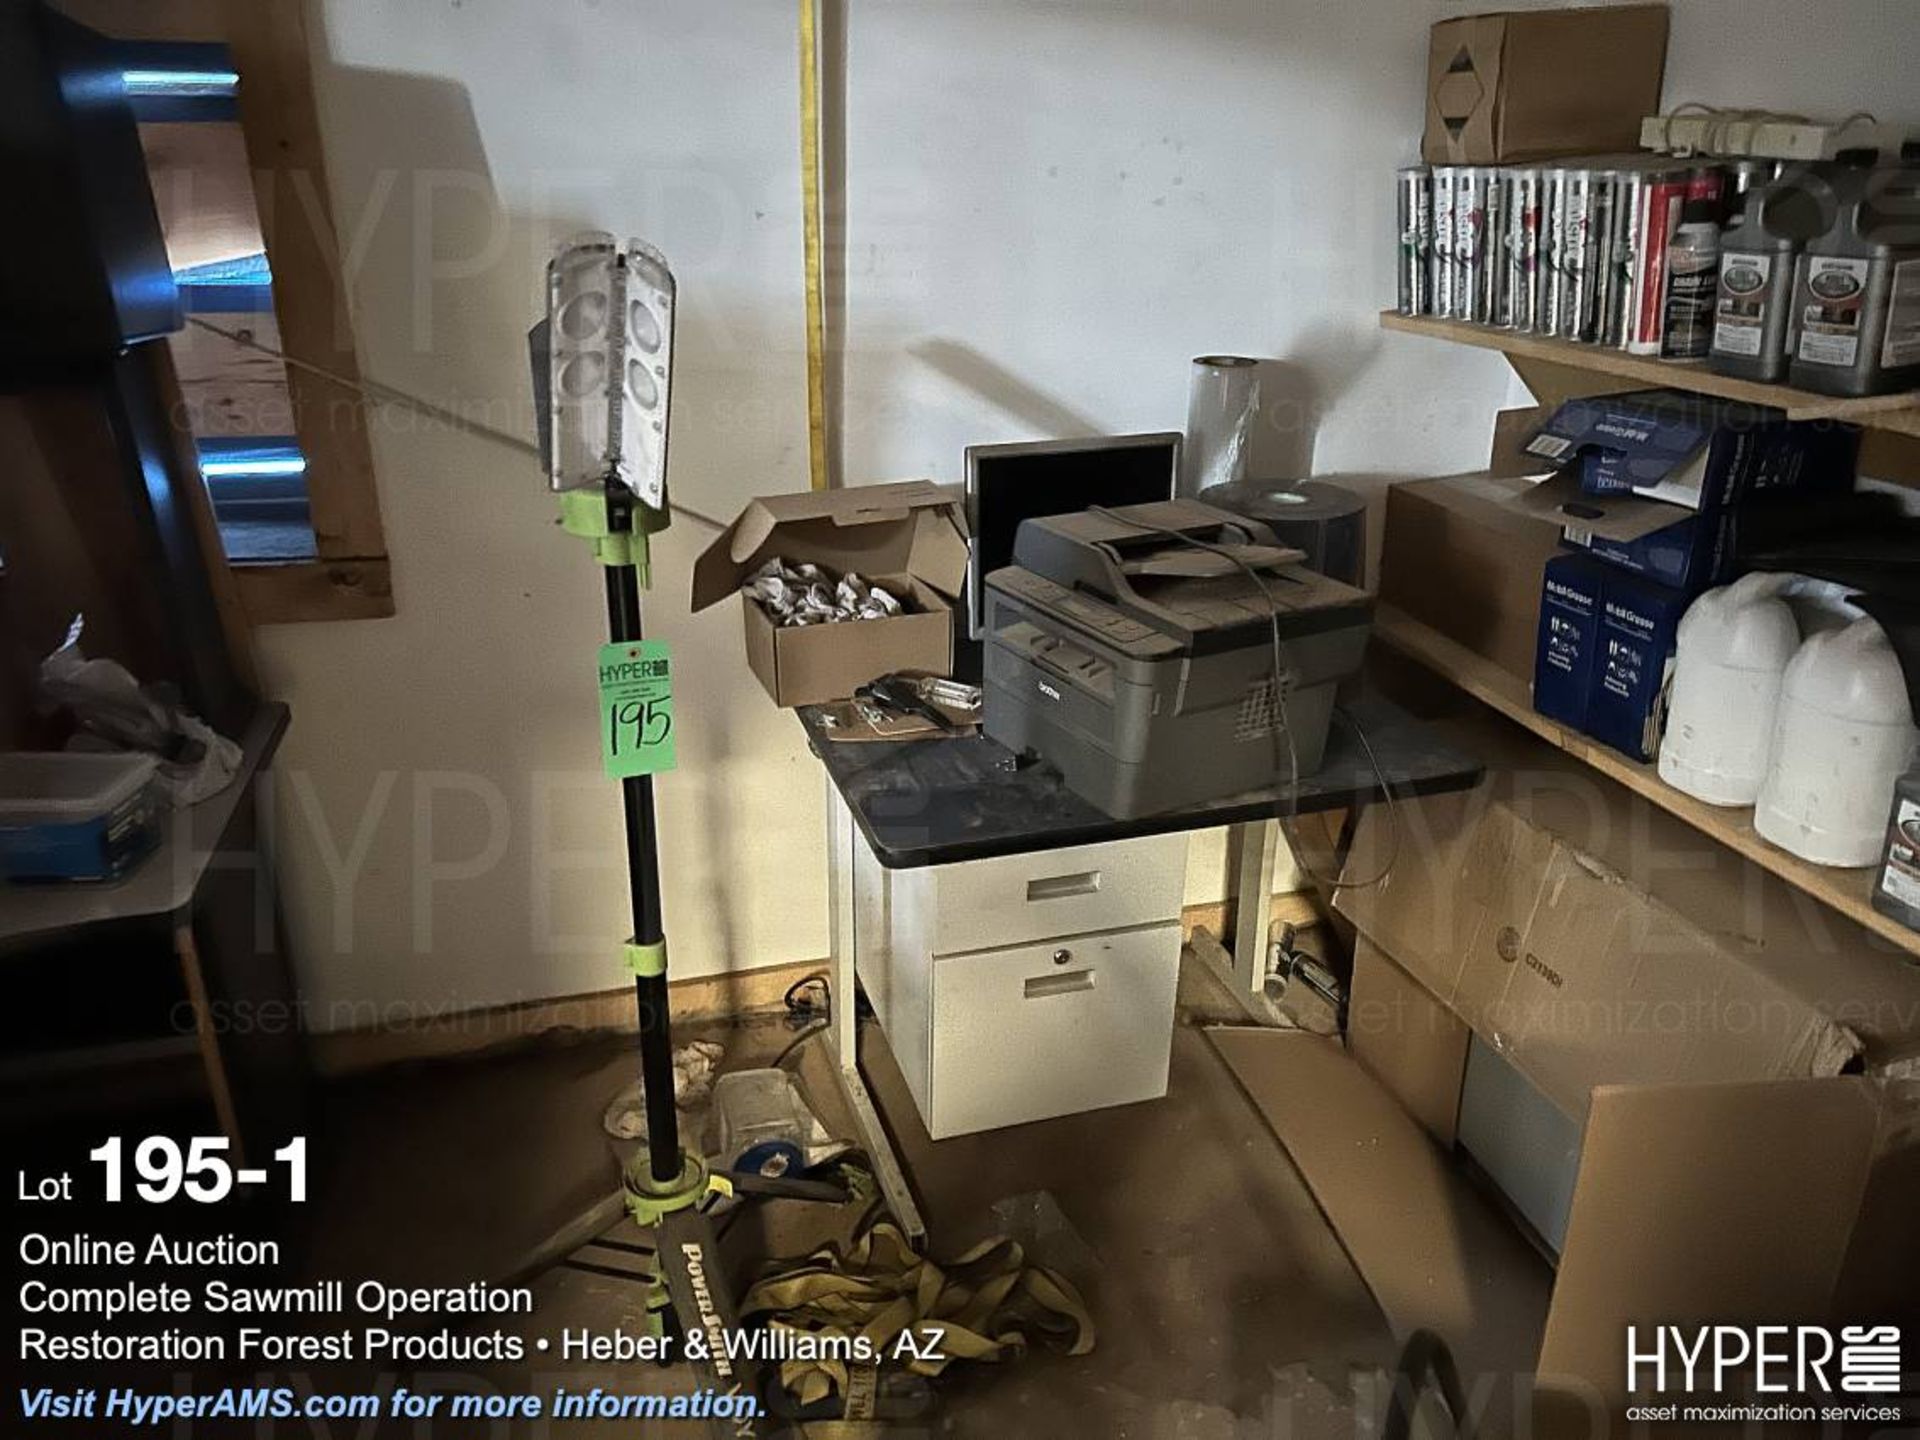 Lot: Lights, desks, table, refrigerator, shelves, grease and supplies